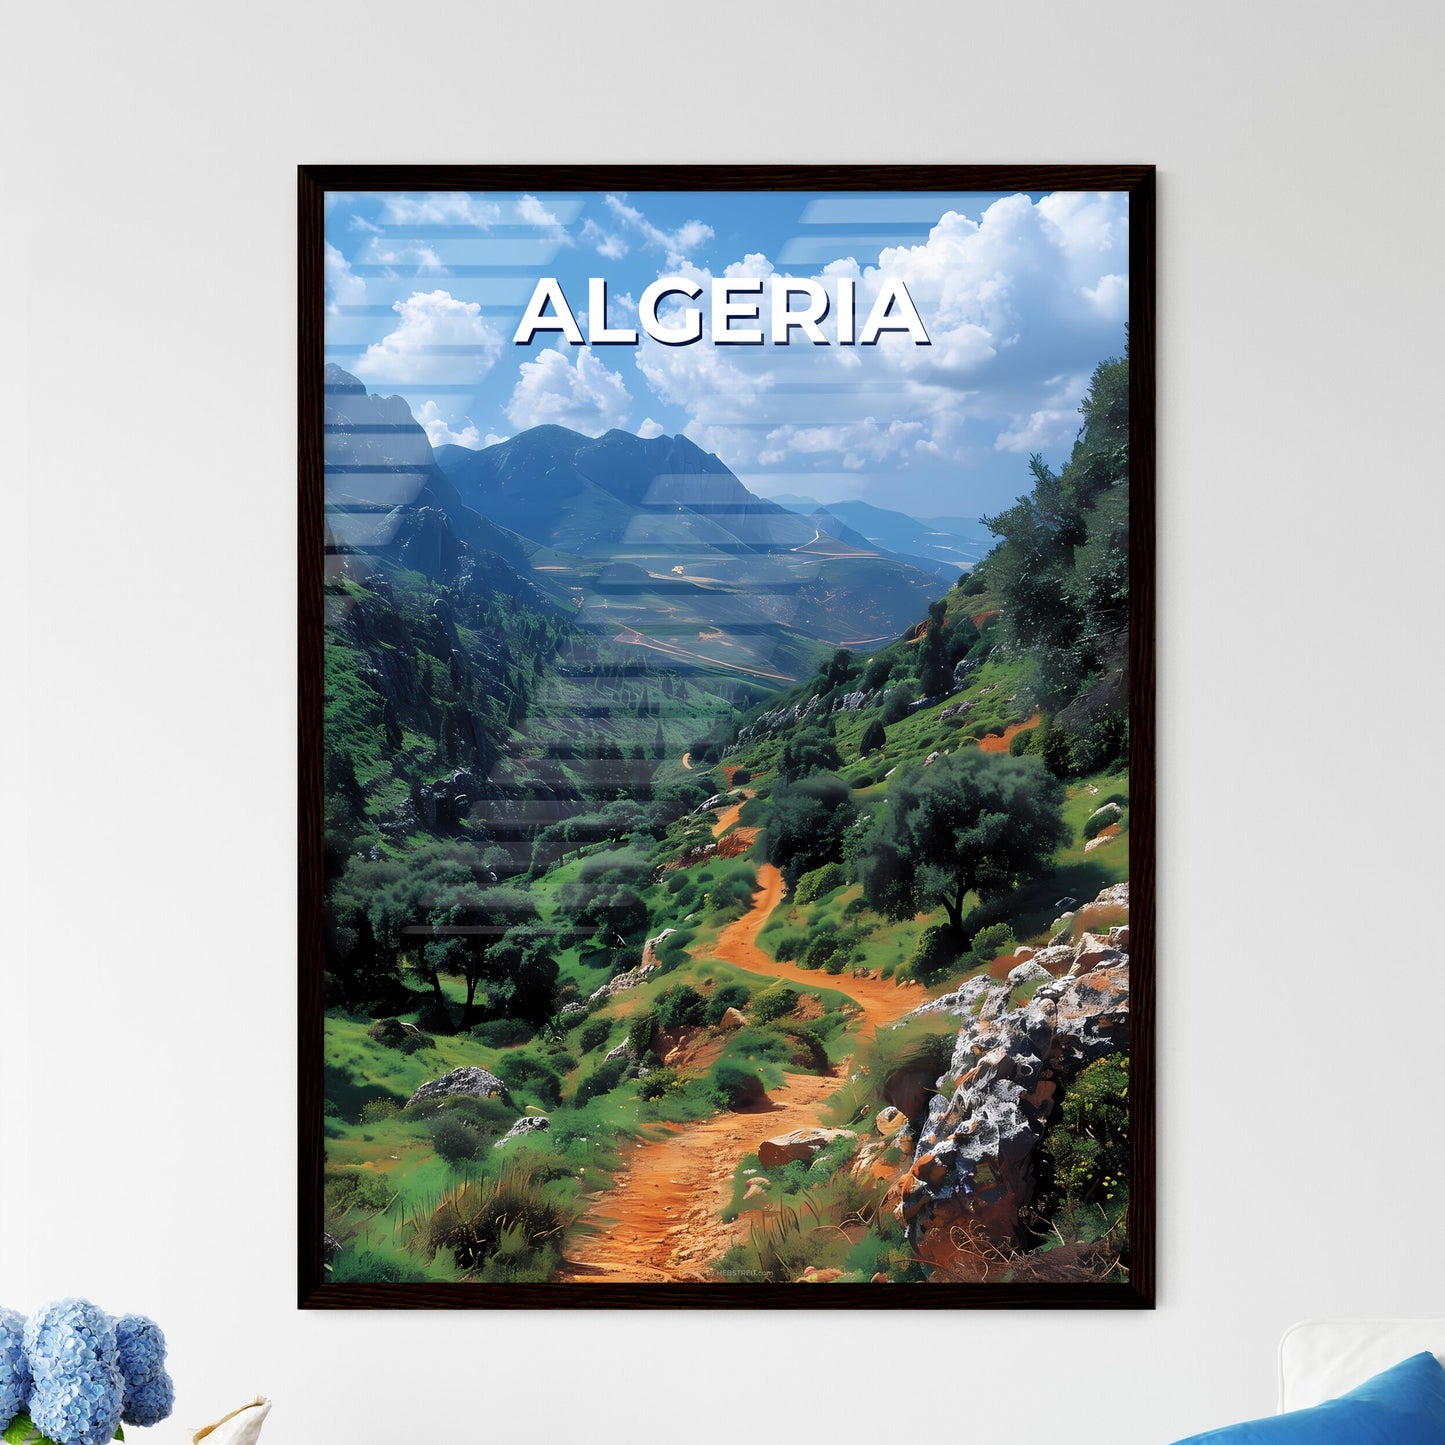 Vibrant Valley Landscape Artwork of Algeria, Africa Featuring Majestic Trees and Mountains